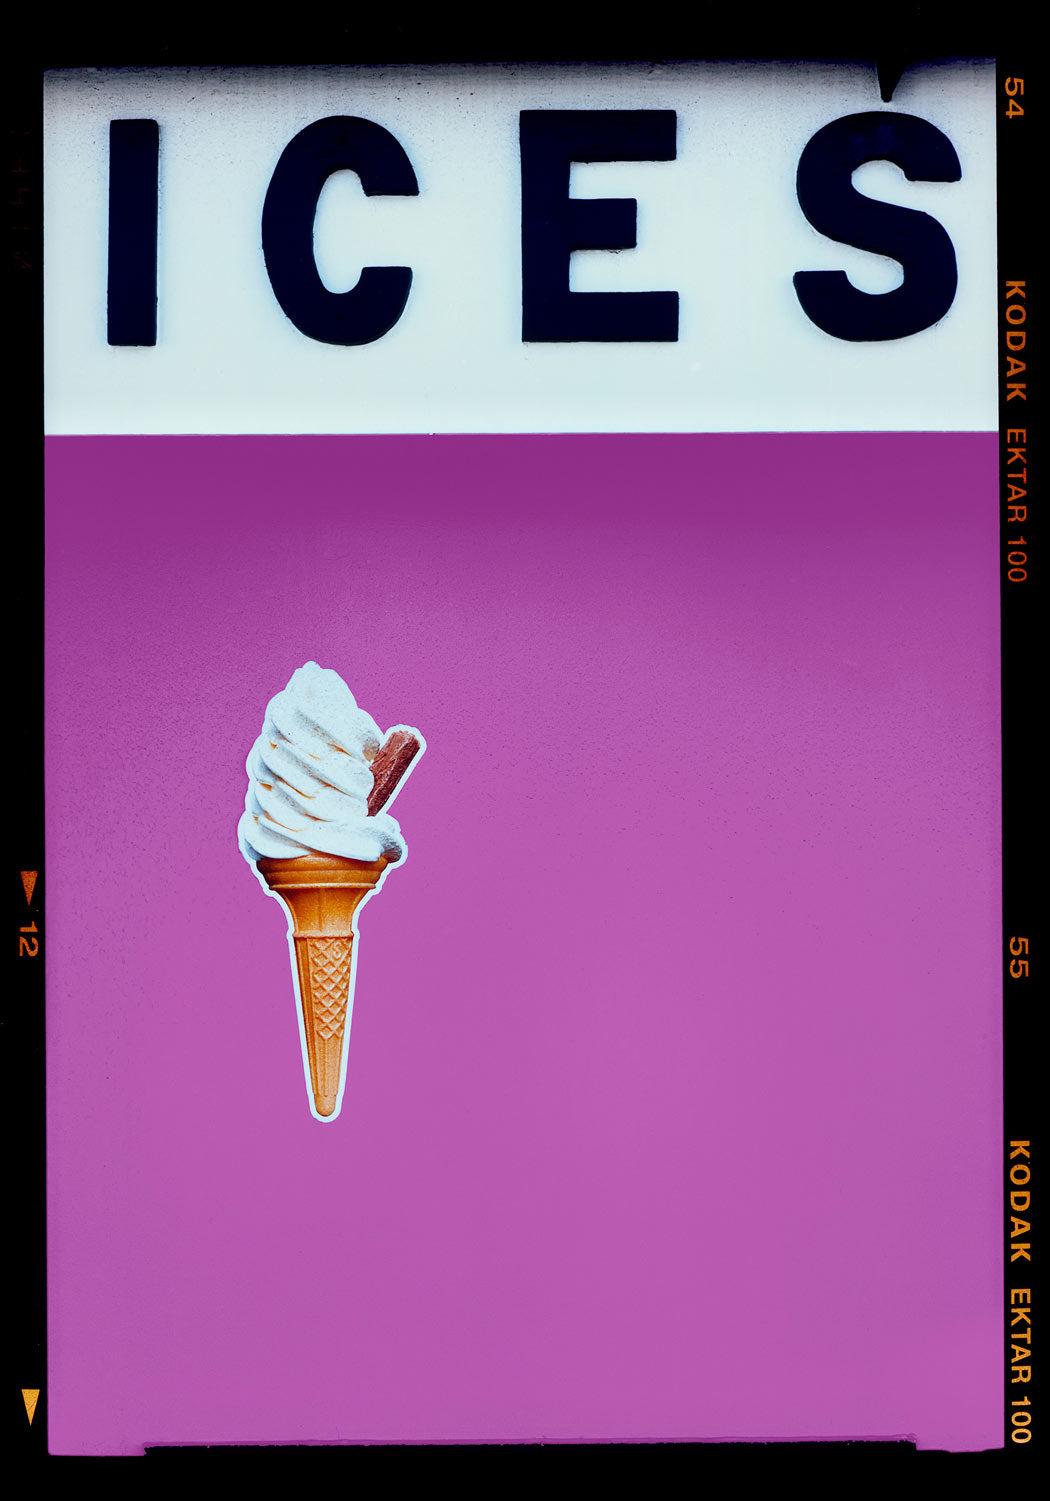 ICES (Plum), Bexhill-on-Sea Enlarged